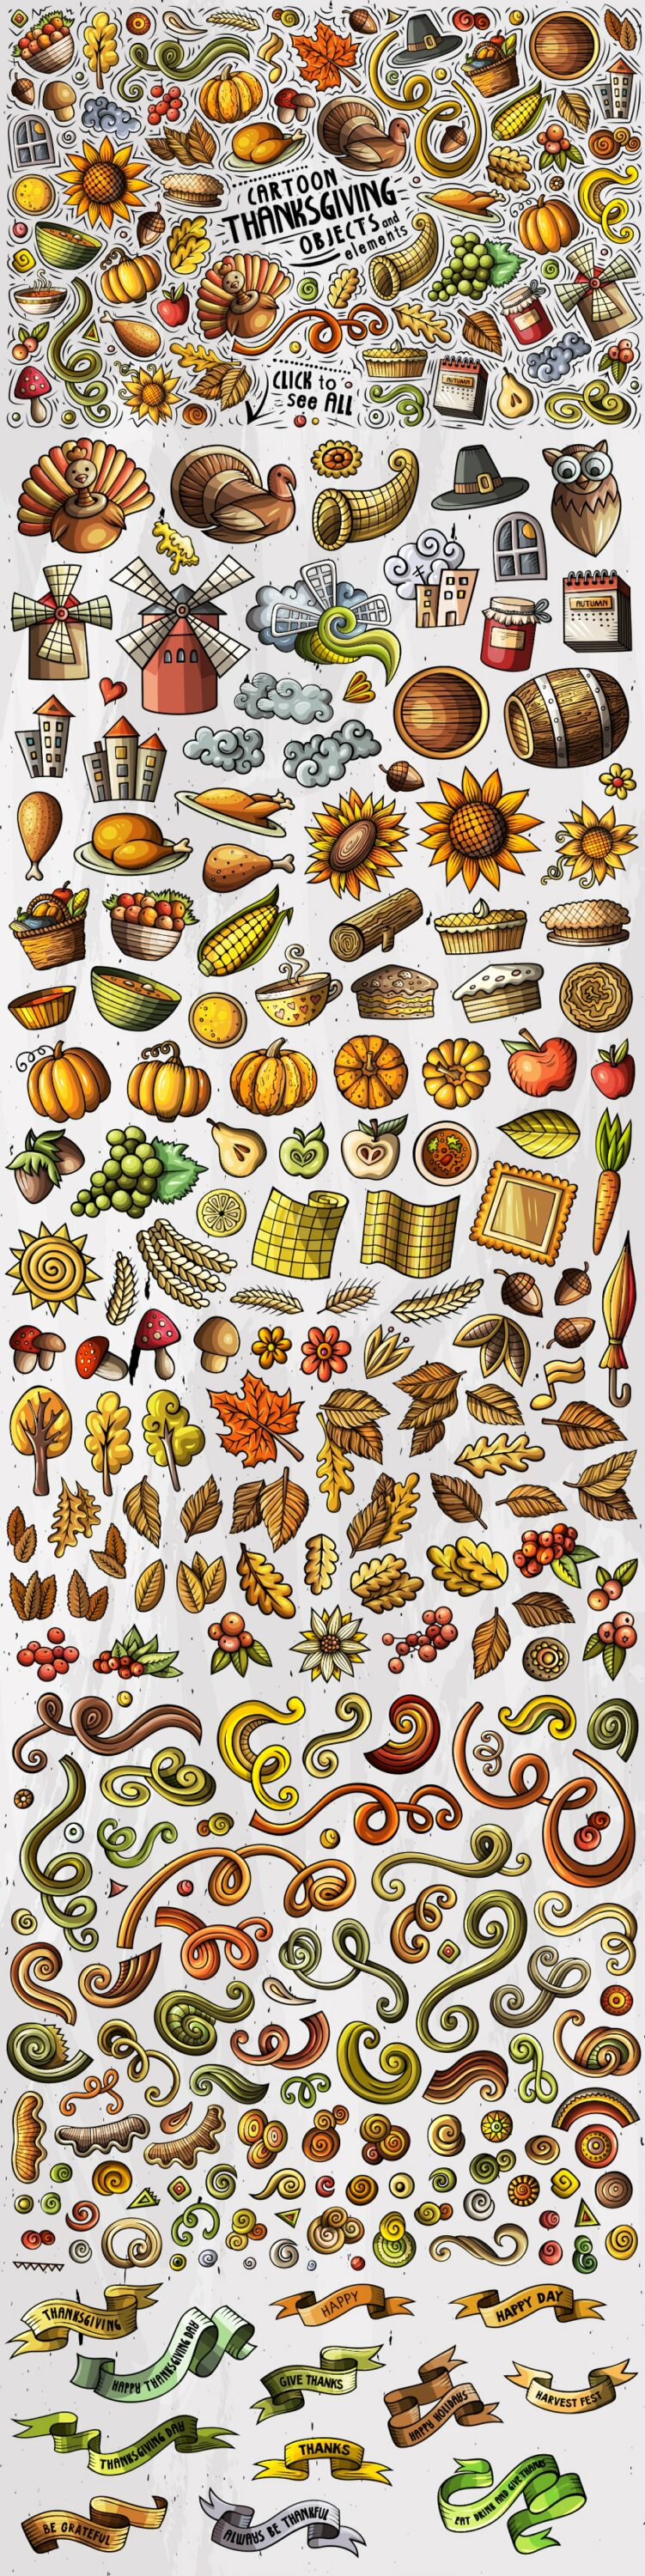 Objects on the day of thanksgiving in the image.